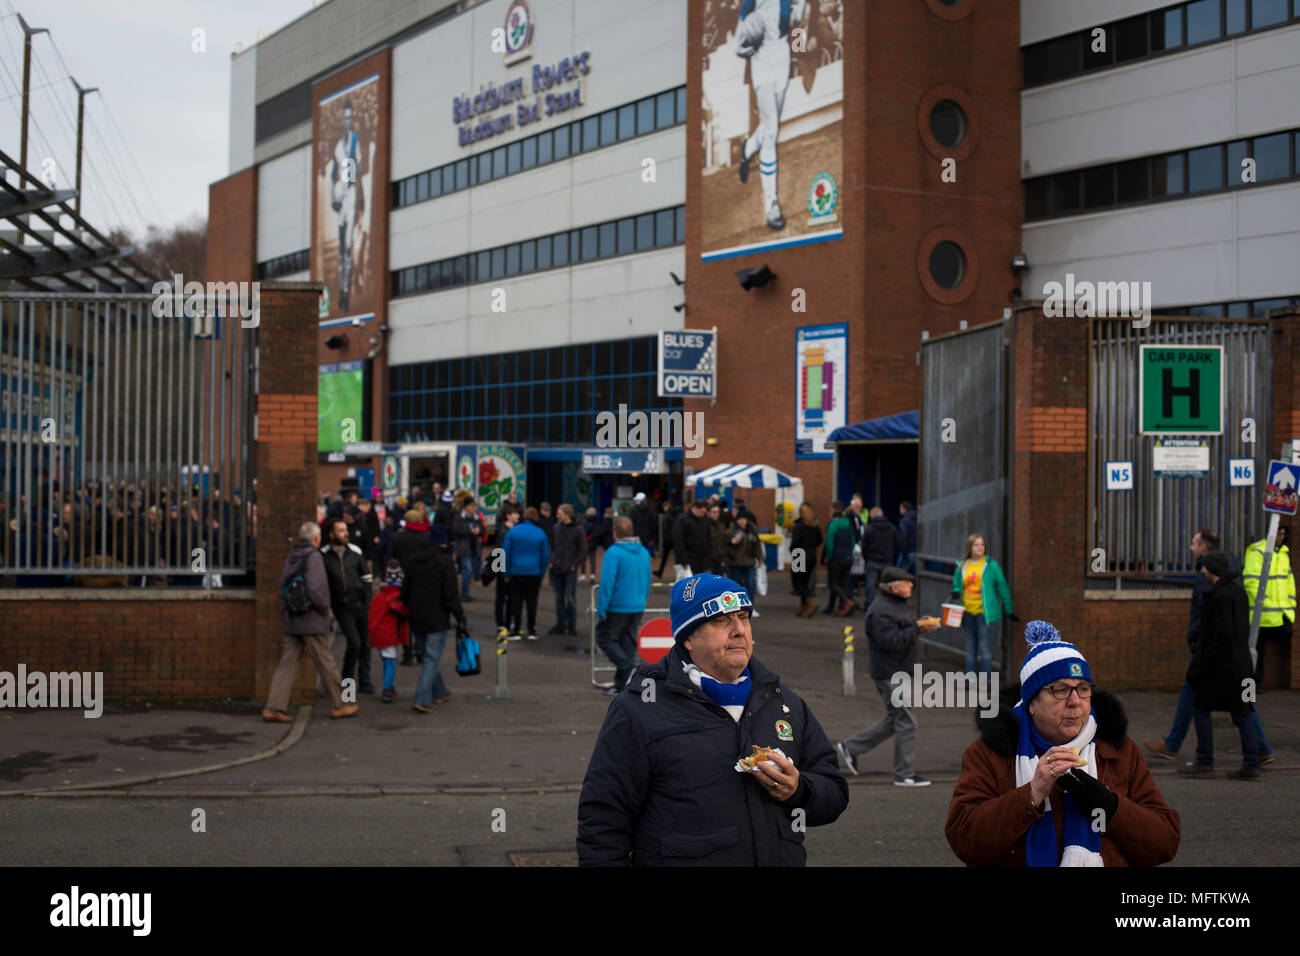 Fans gathering the outside the Blackburn End Stand before Blackburn Rovers played Shrewsbury Town in a Sky Bet League One fixture at Ewood Park. Both team were in the top three in the division at the start of the game. Blackburn won the match by 3 goals to 1, watched by a crowd of 13,579. Stock Photo